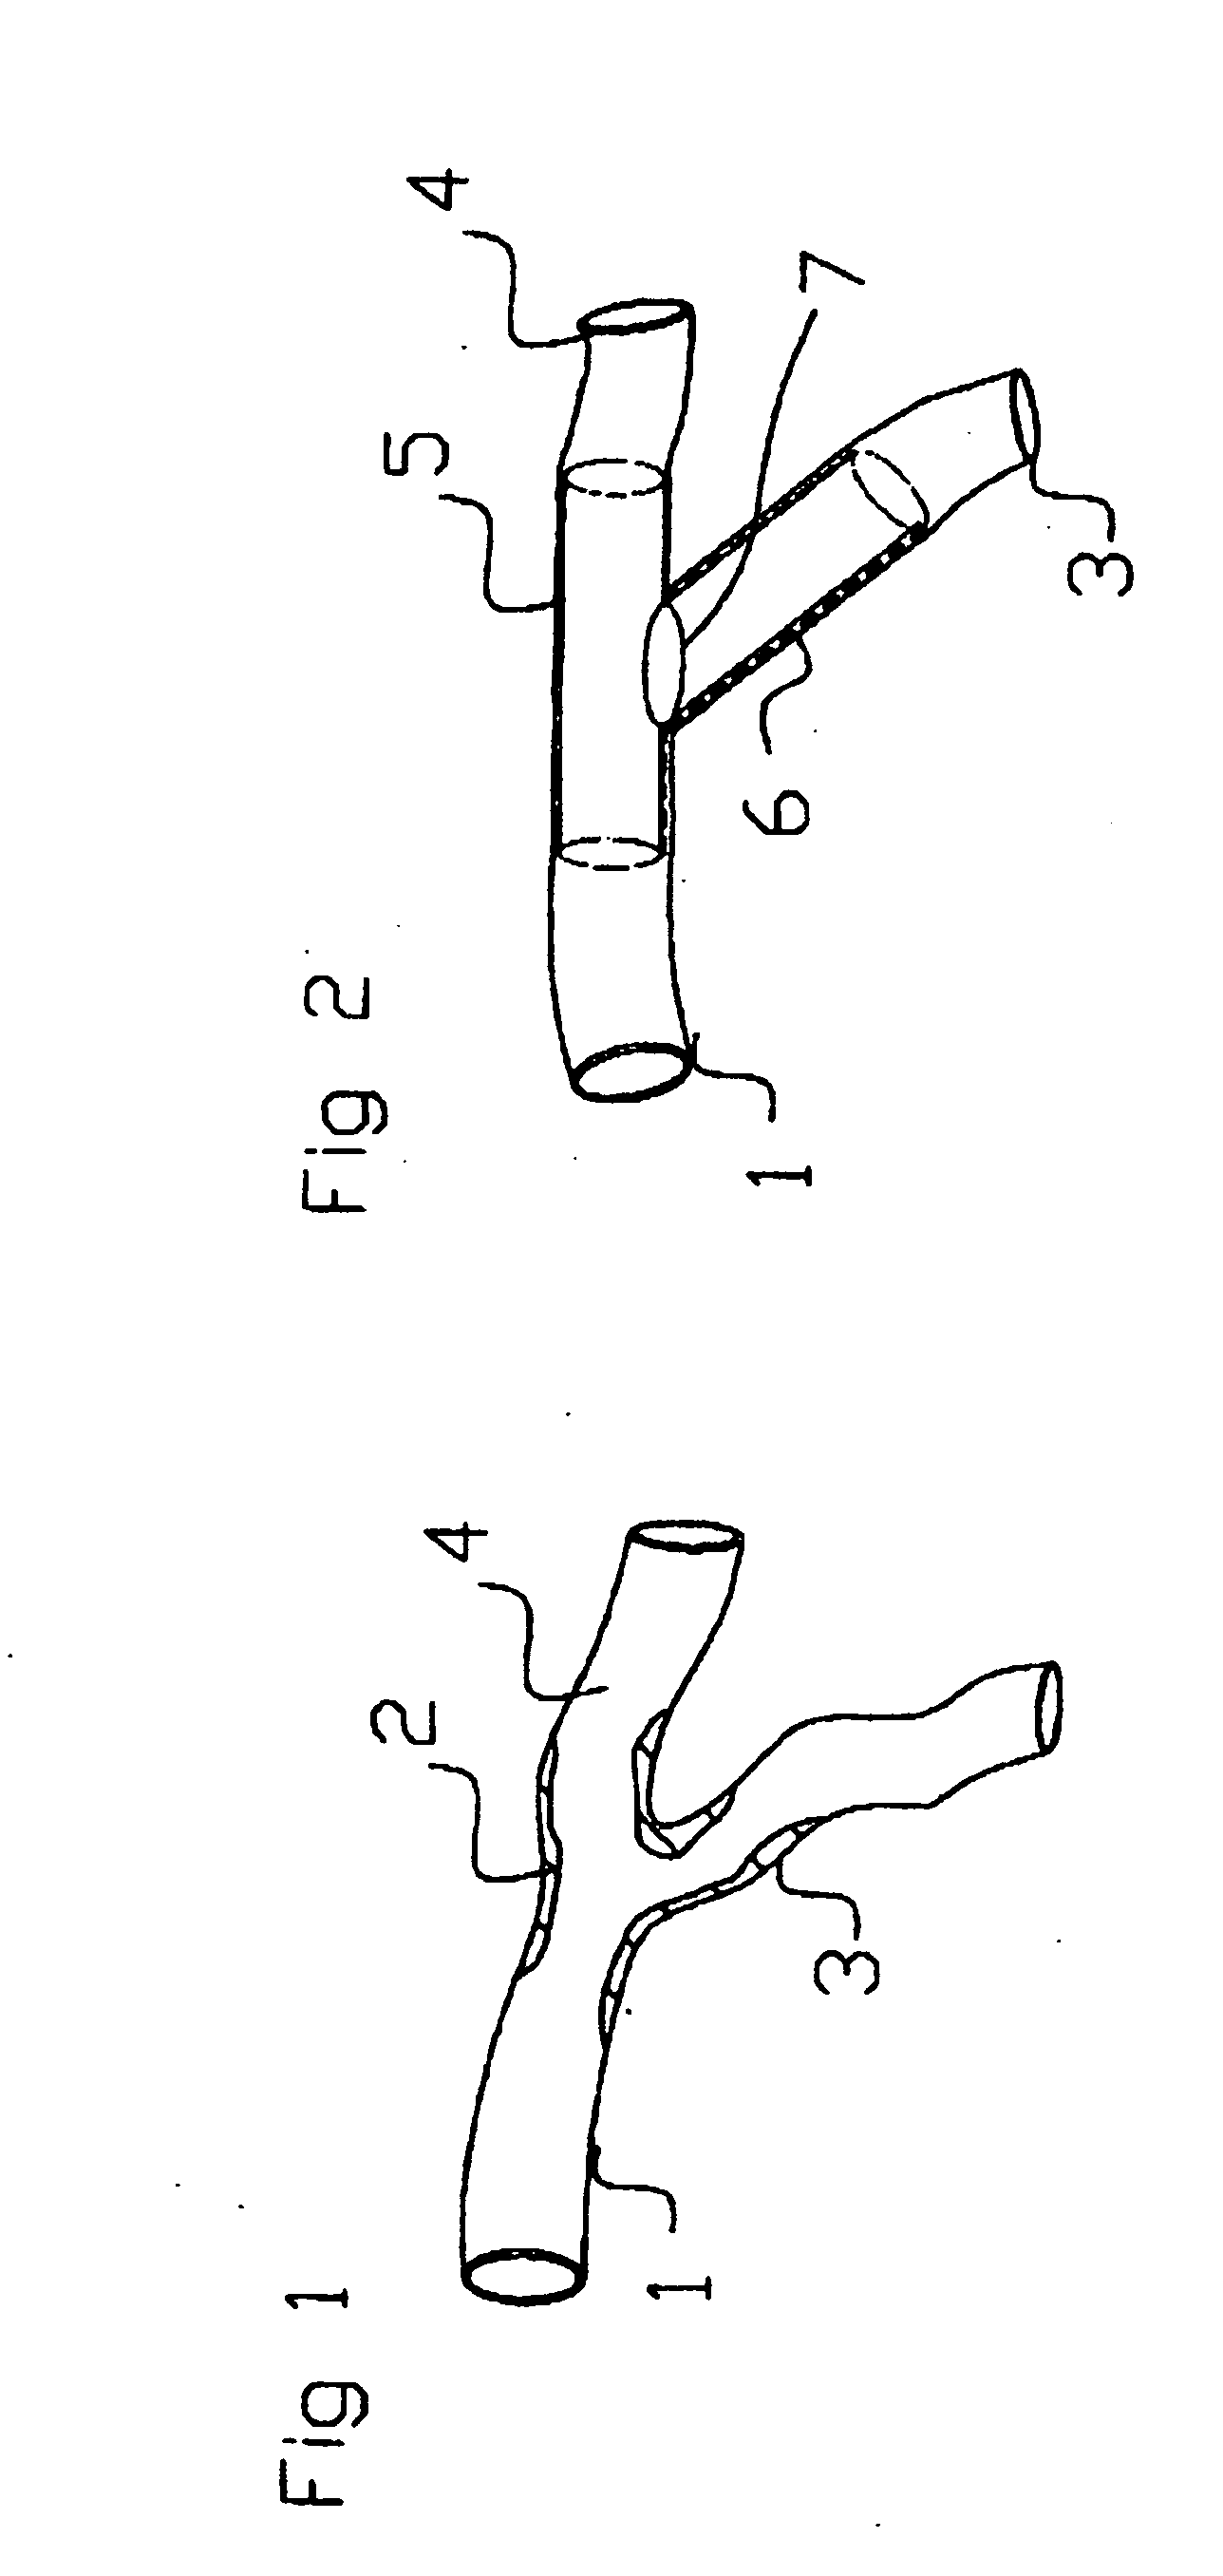 Catheter device for delivery of stents to bifurcated arteries